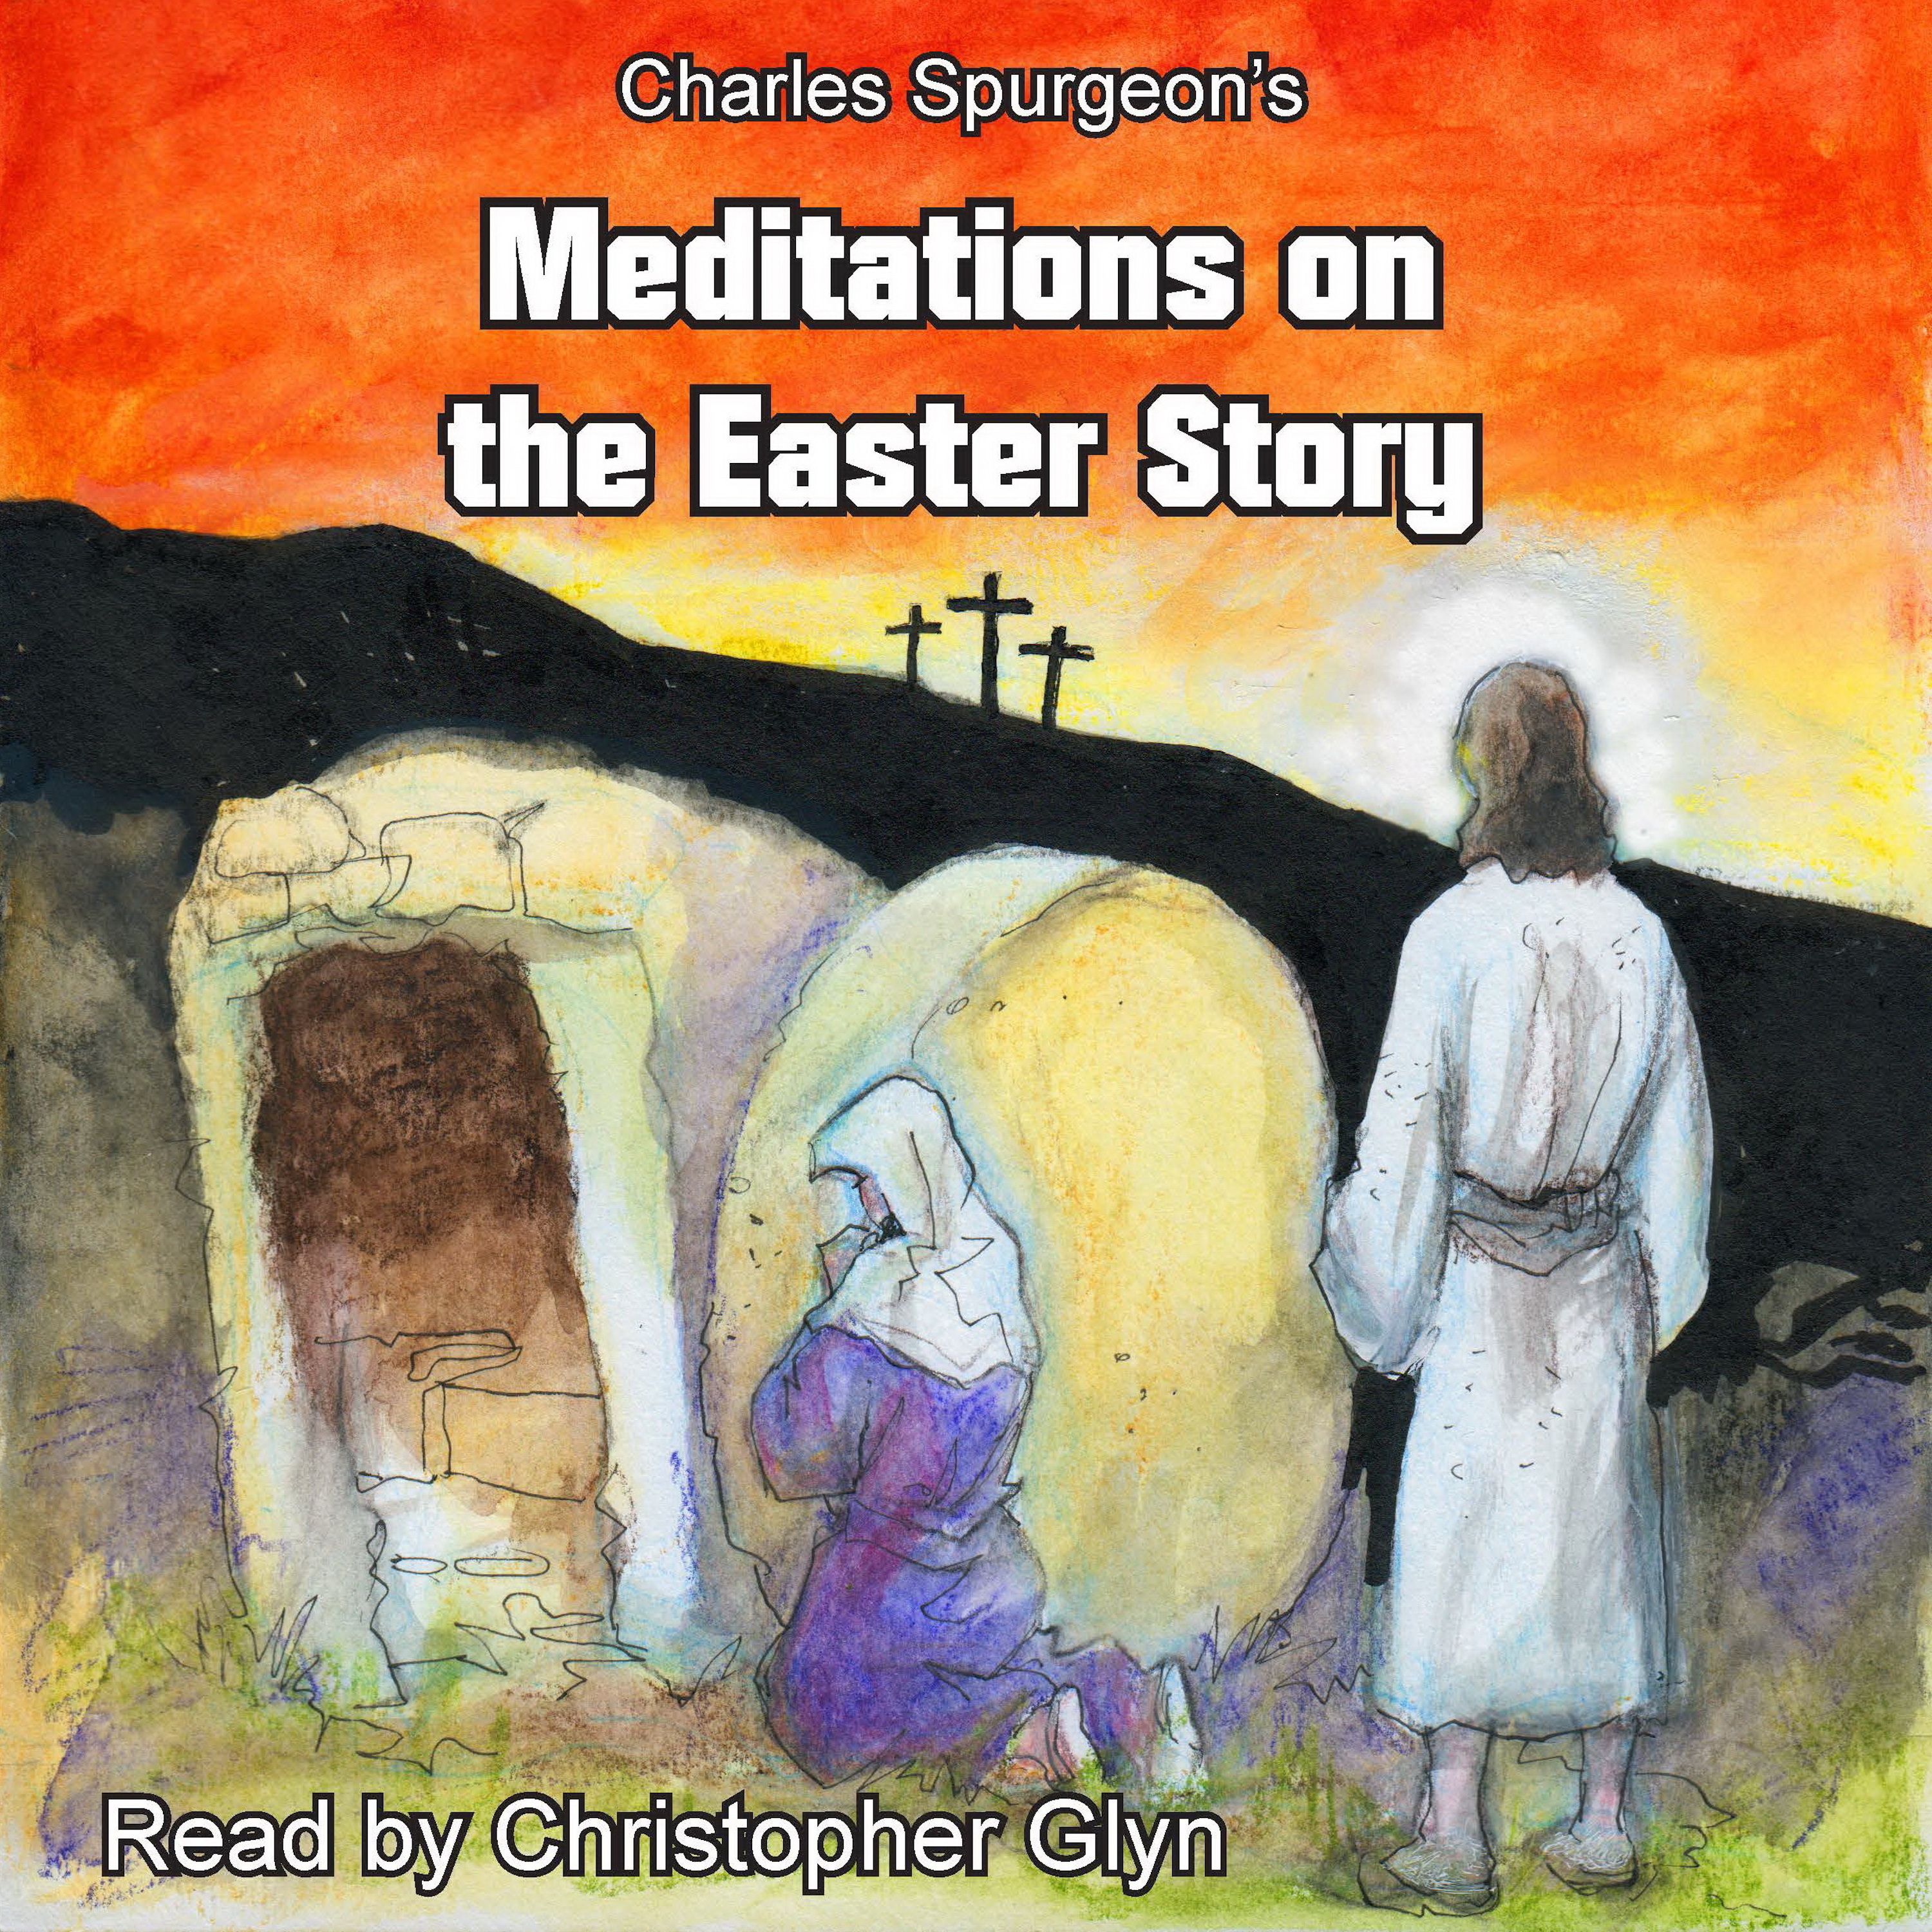 Charles Spurgeon's Meditations On The Easter Story, audiobook by Charles Spurgeon